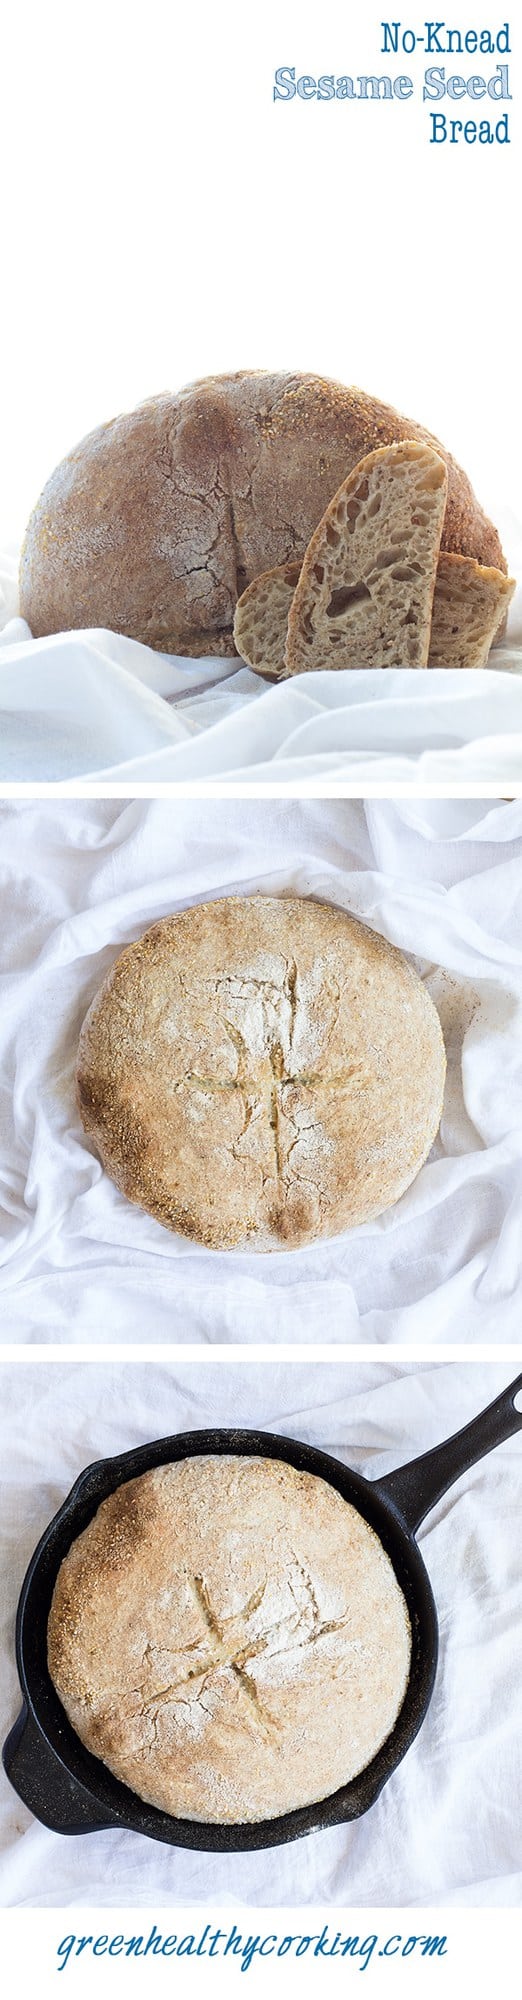 Collage of No-Knead Sesame Seed Bread images with text overlay for Pinterest.